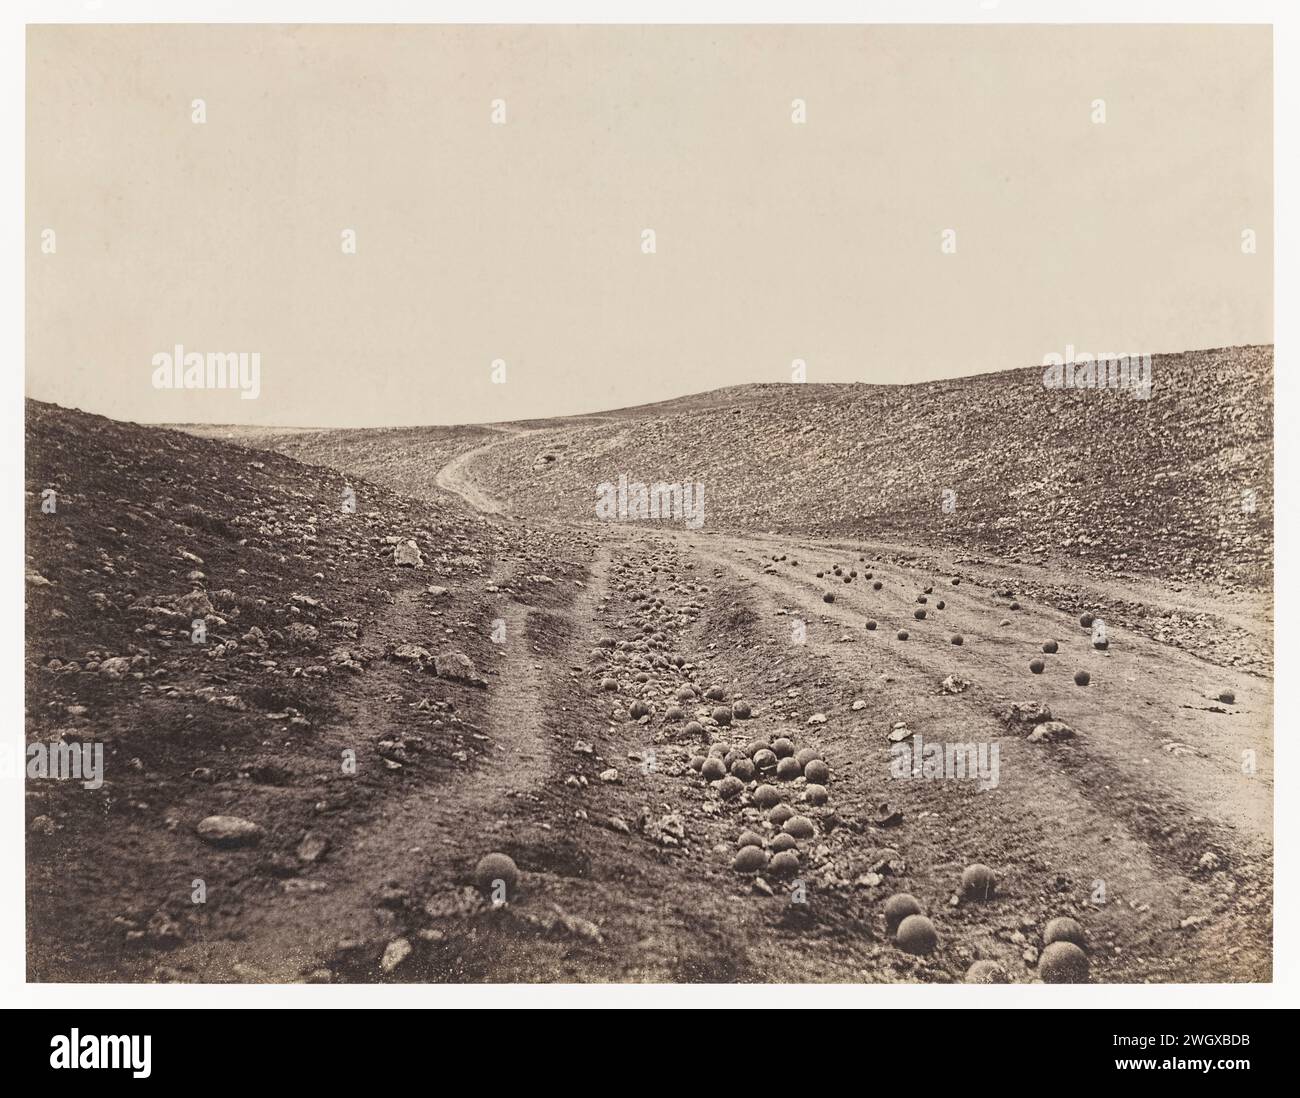 Valley of the Shadow of Death’ photograph taken during the Crimean War by Roger Fenton (1819-1869) on 23 April 1855. This now iconic image shows a heavily bombarded road in a ravine strewn with cannonballs fired by the Russian Empire at British soldiers. Stock Photo